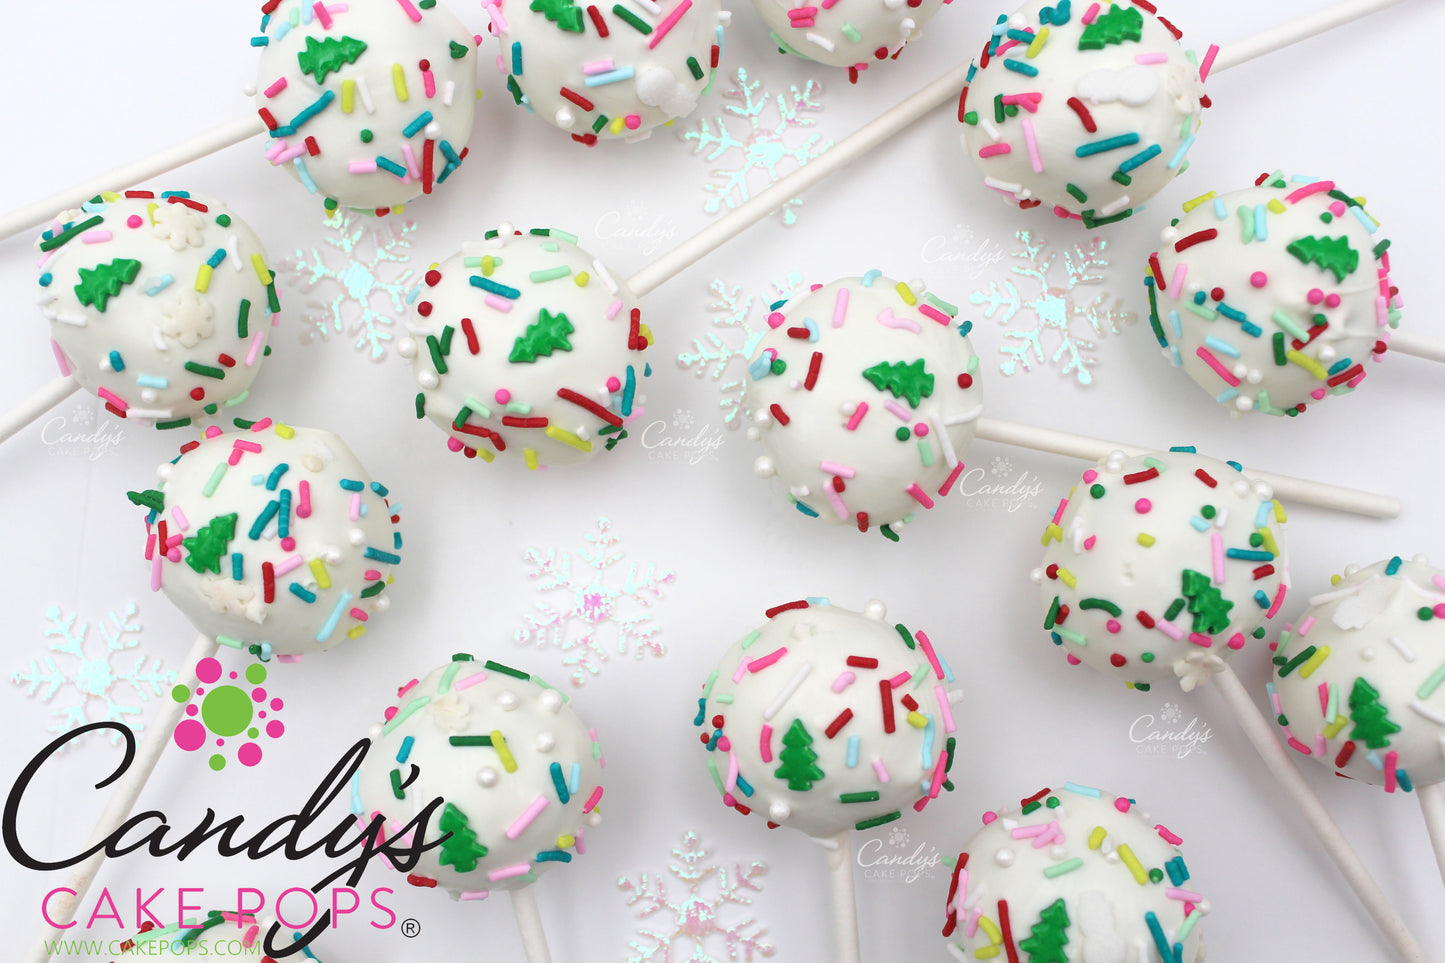 Whimsical Christmas Tree Party Cake Pops - Candy's Cake Pops